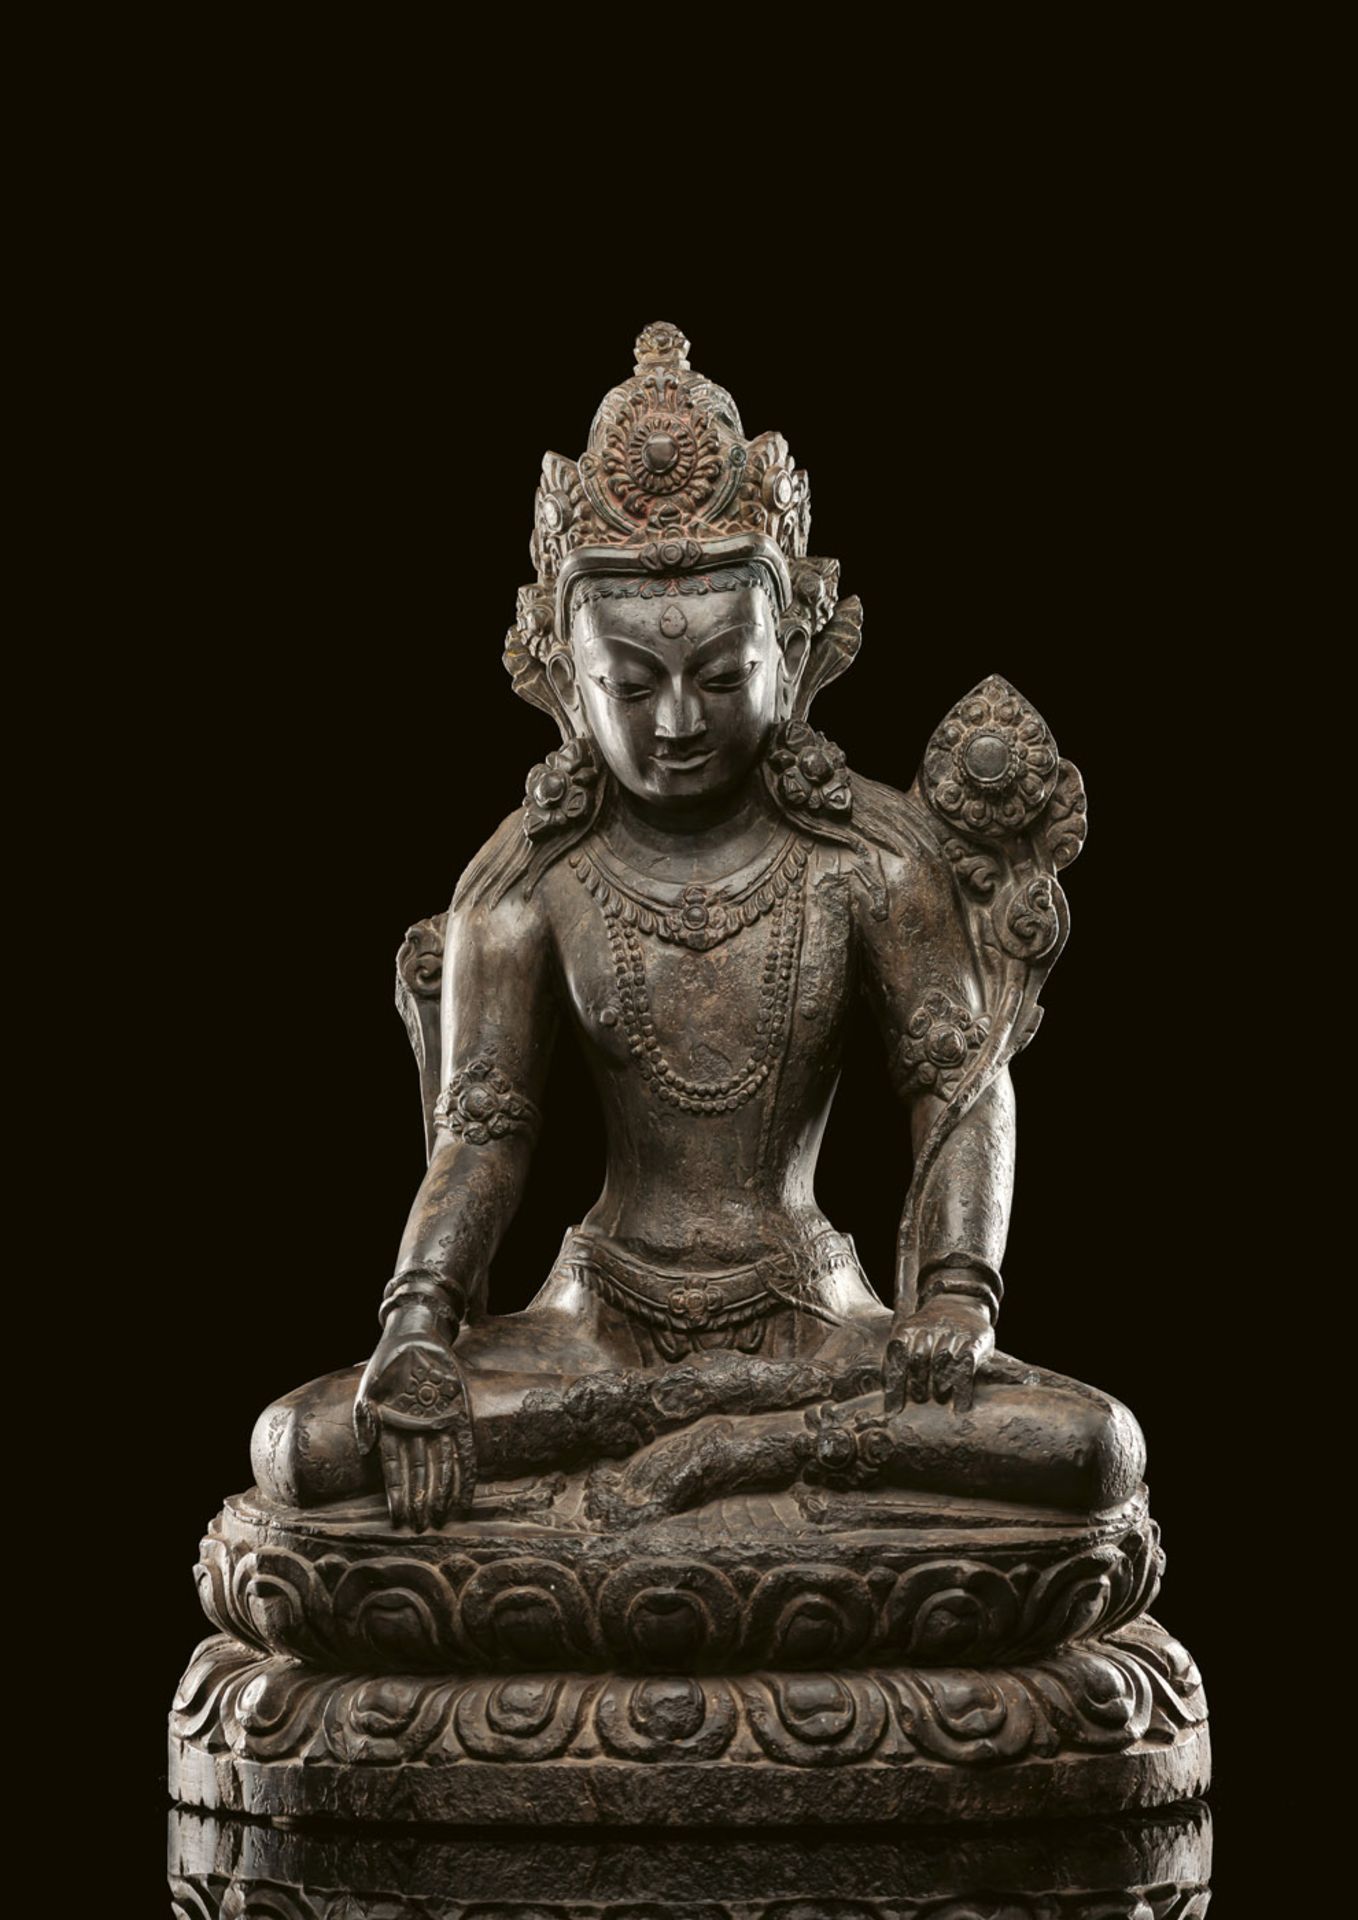 A RARE AND LARGE CARVED STONE FIGURE OF PADMAPANI